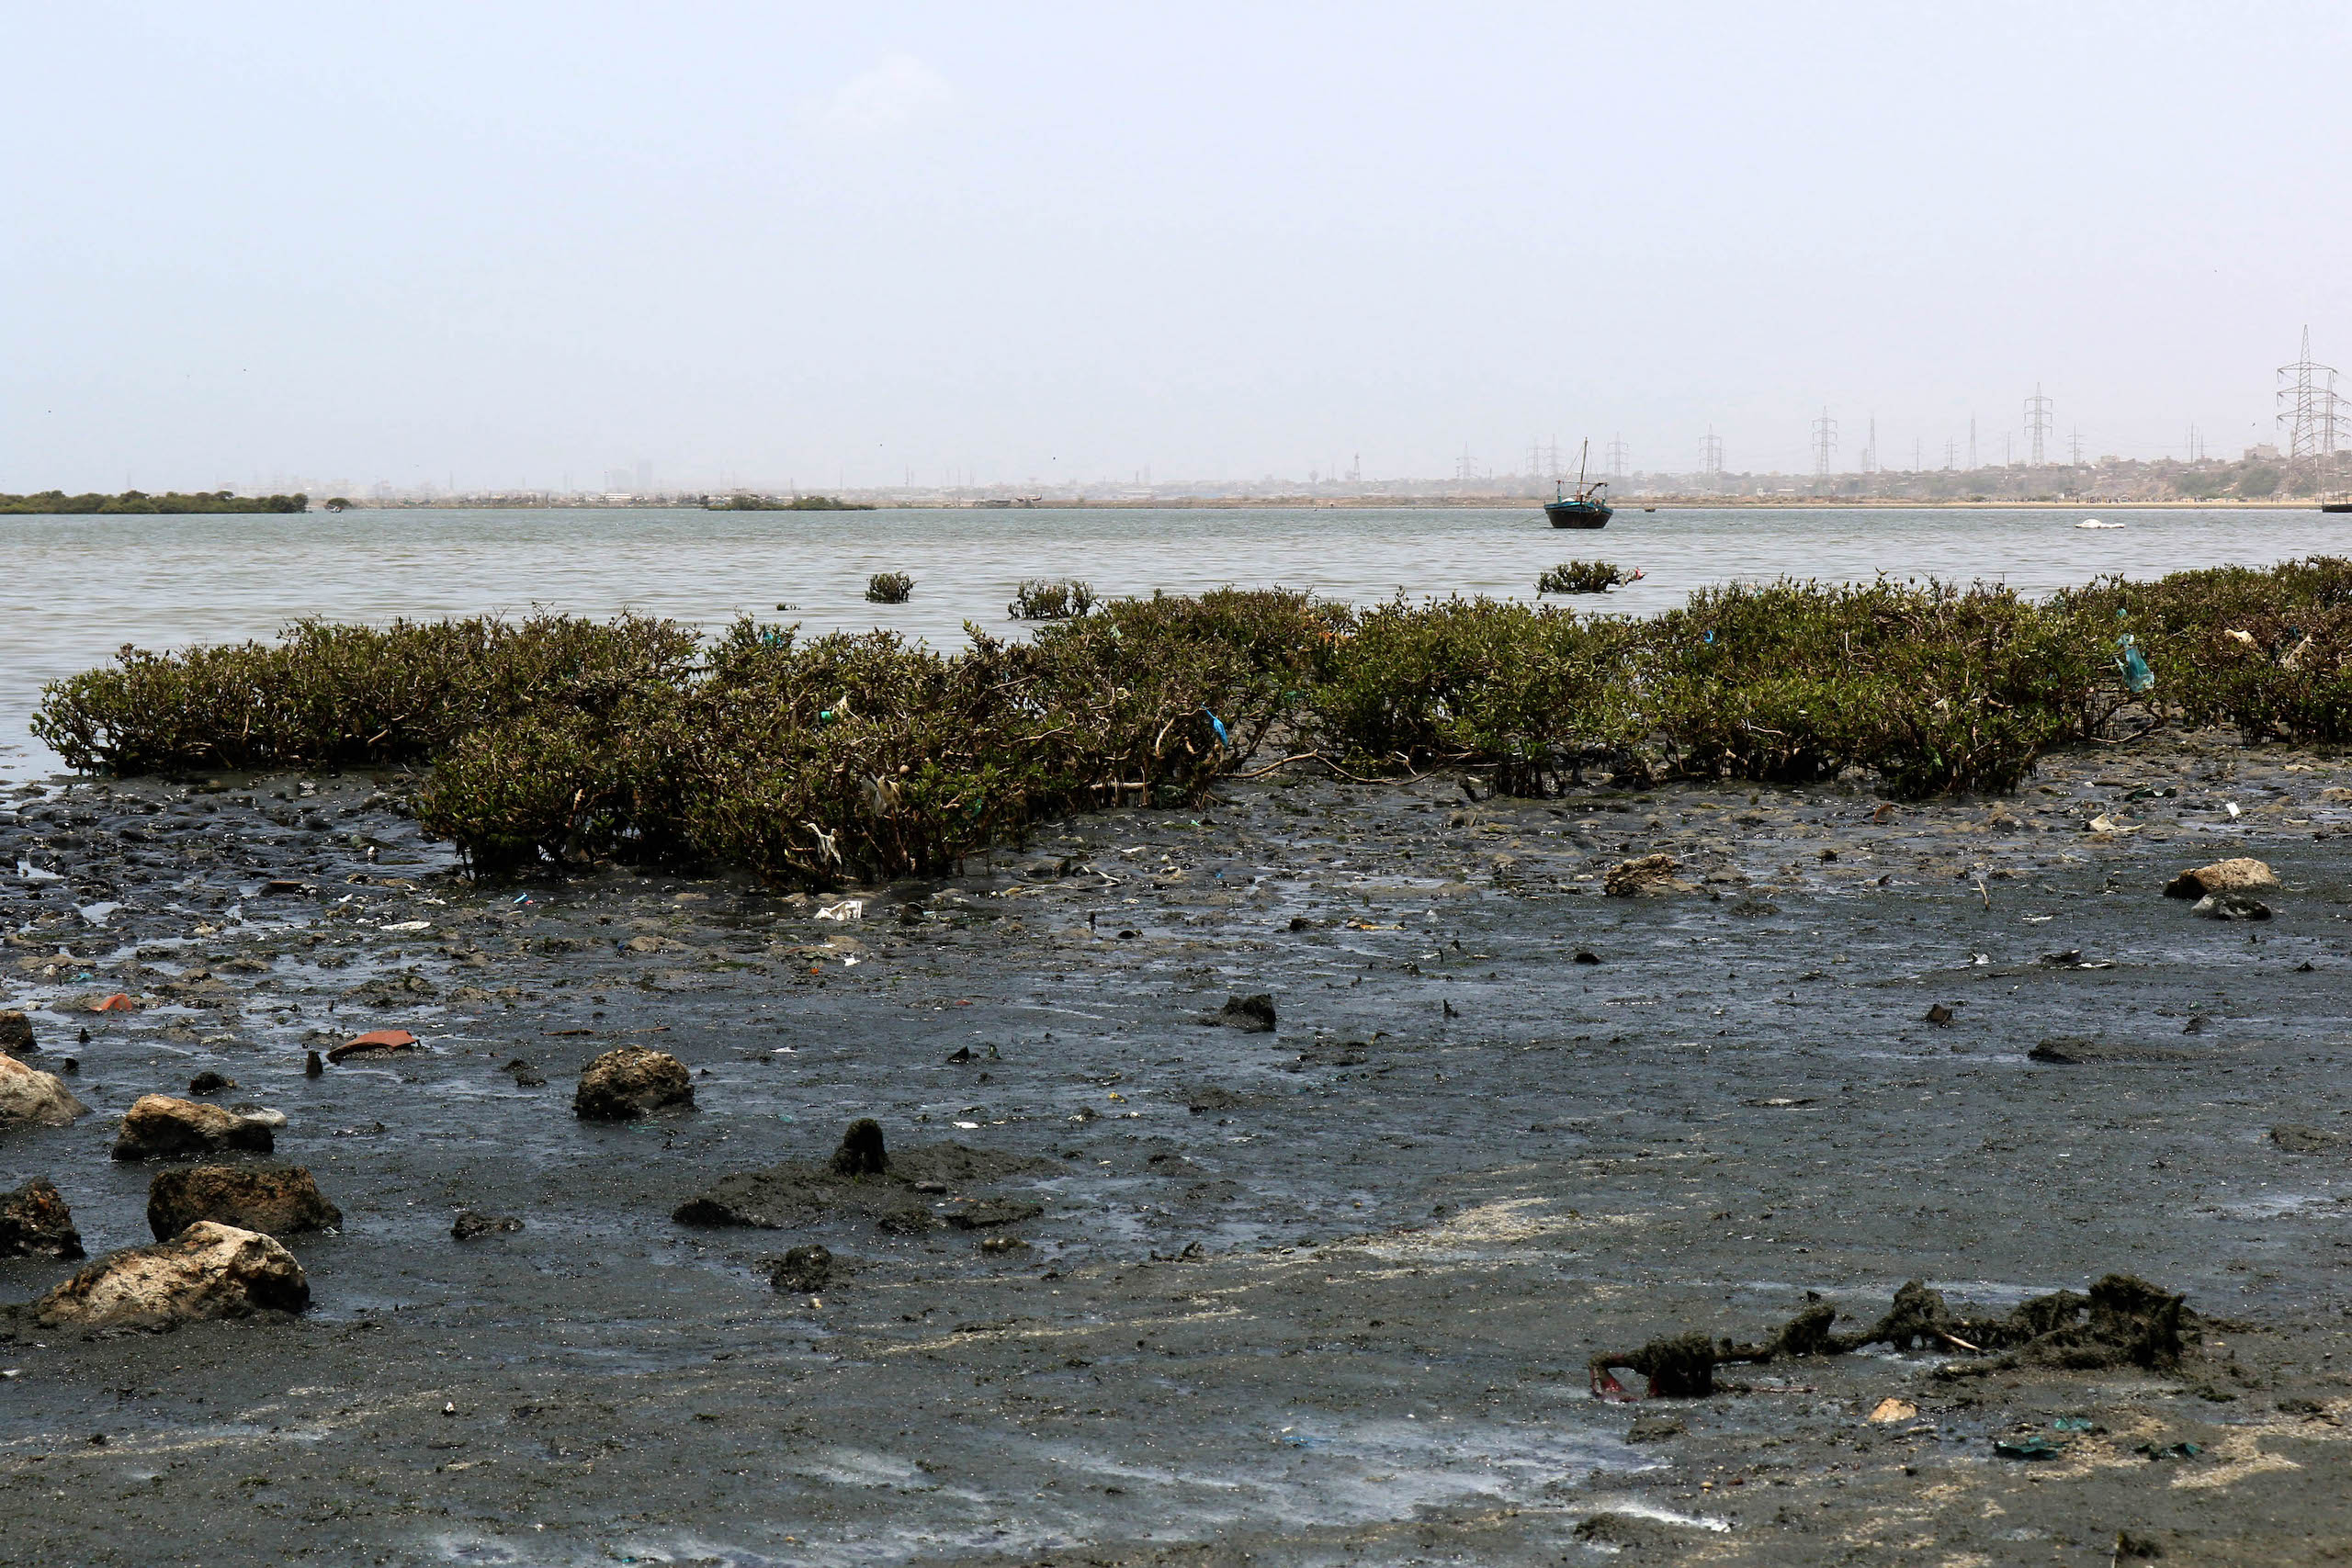 pieces of plastic and other pollutants floating in the water next to mangroves on the Karachi coastline